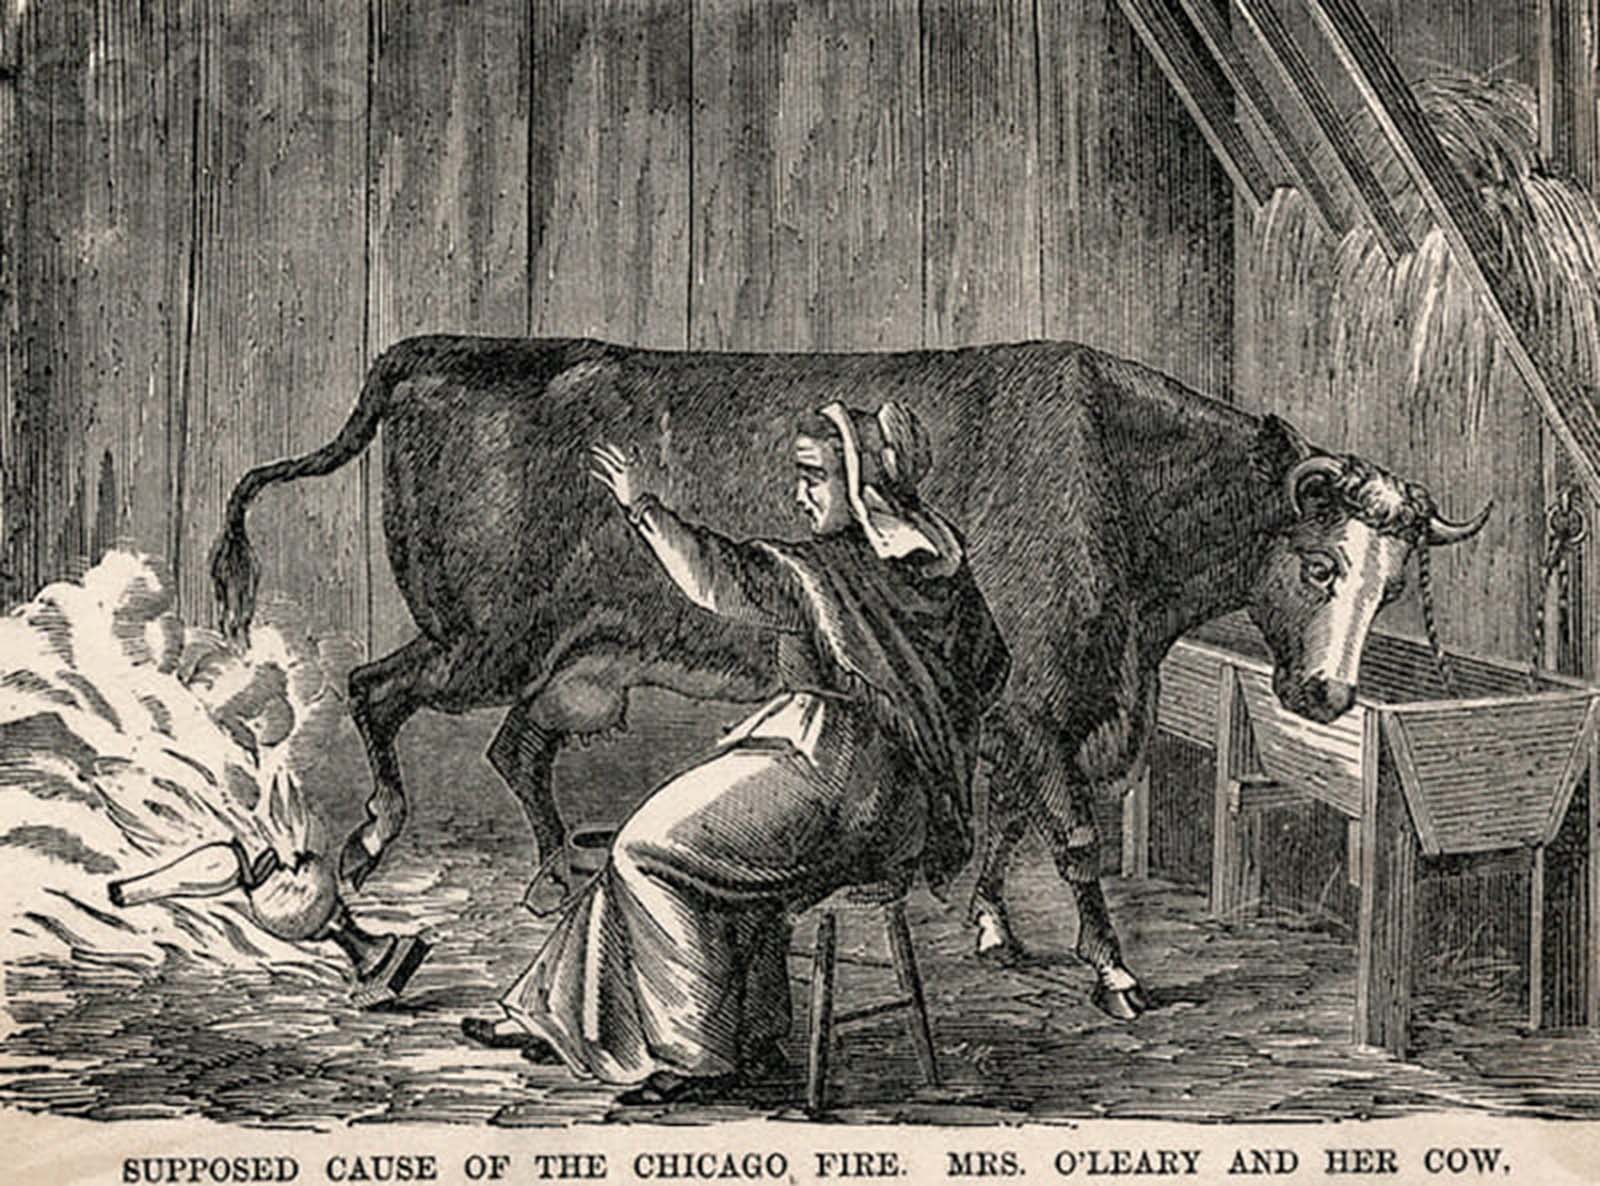 1871 illustration from Harper’s Magazine depicting Mrs. O’Leary milking the cow.